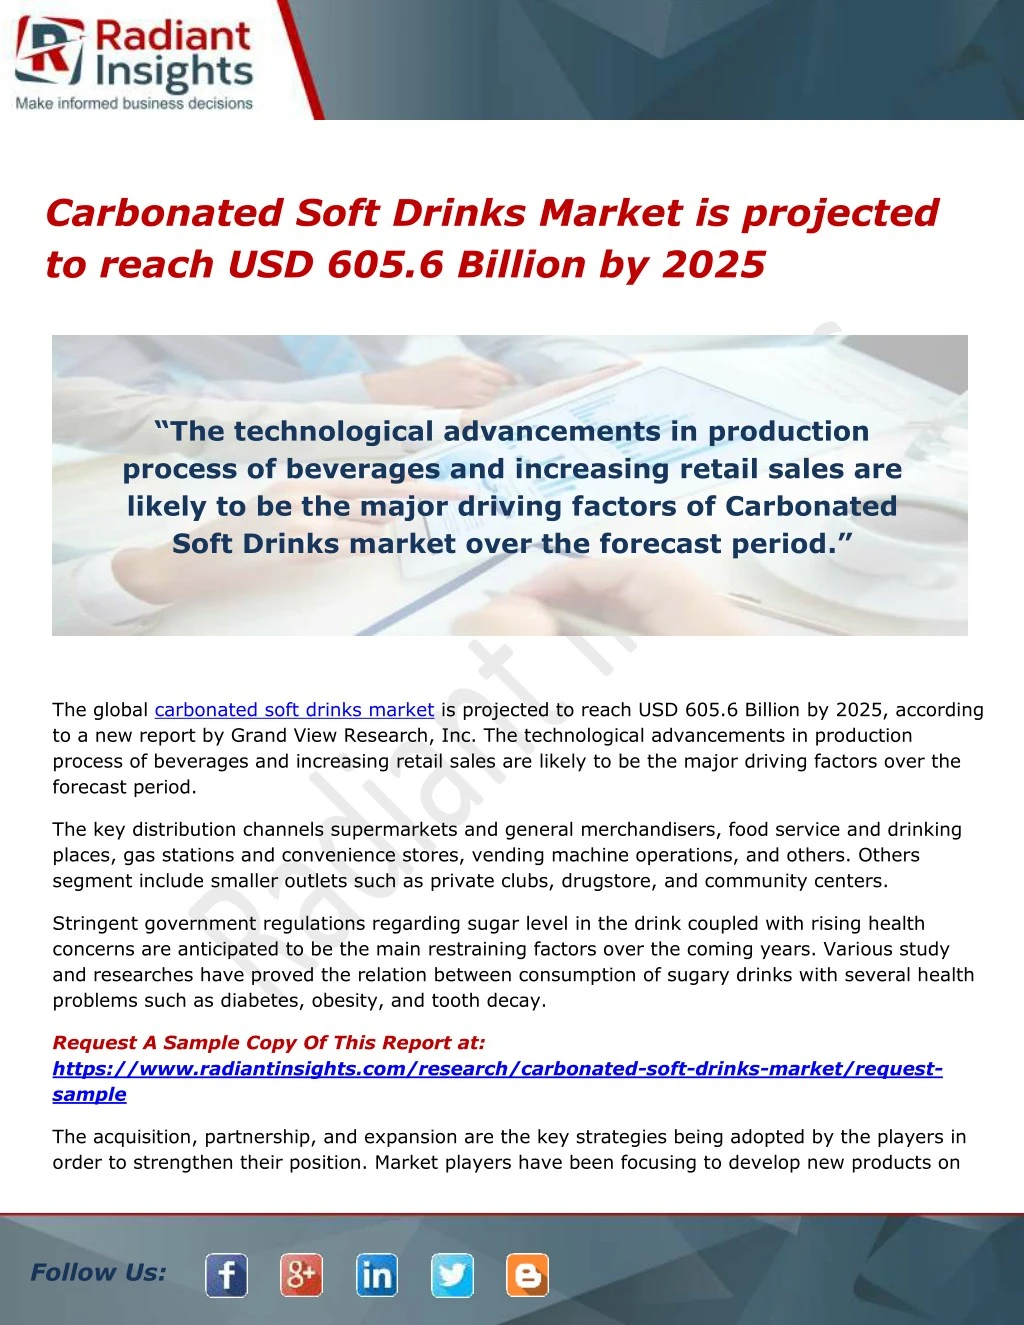 carbonated soft drinks market is projected